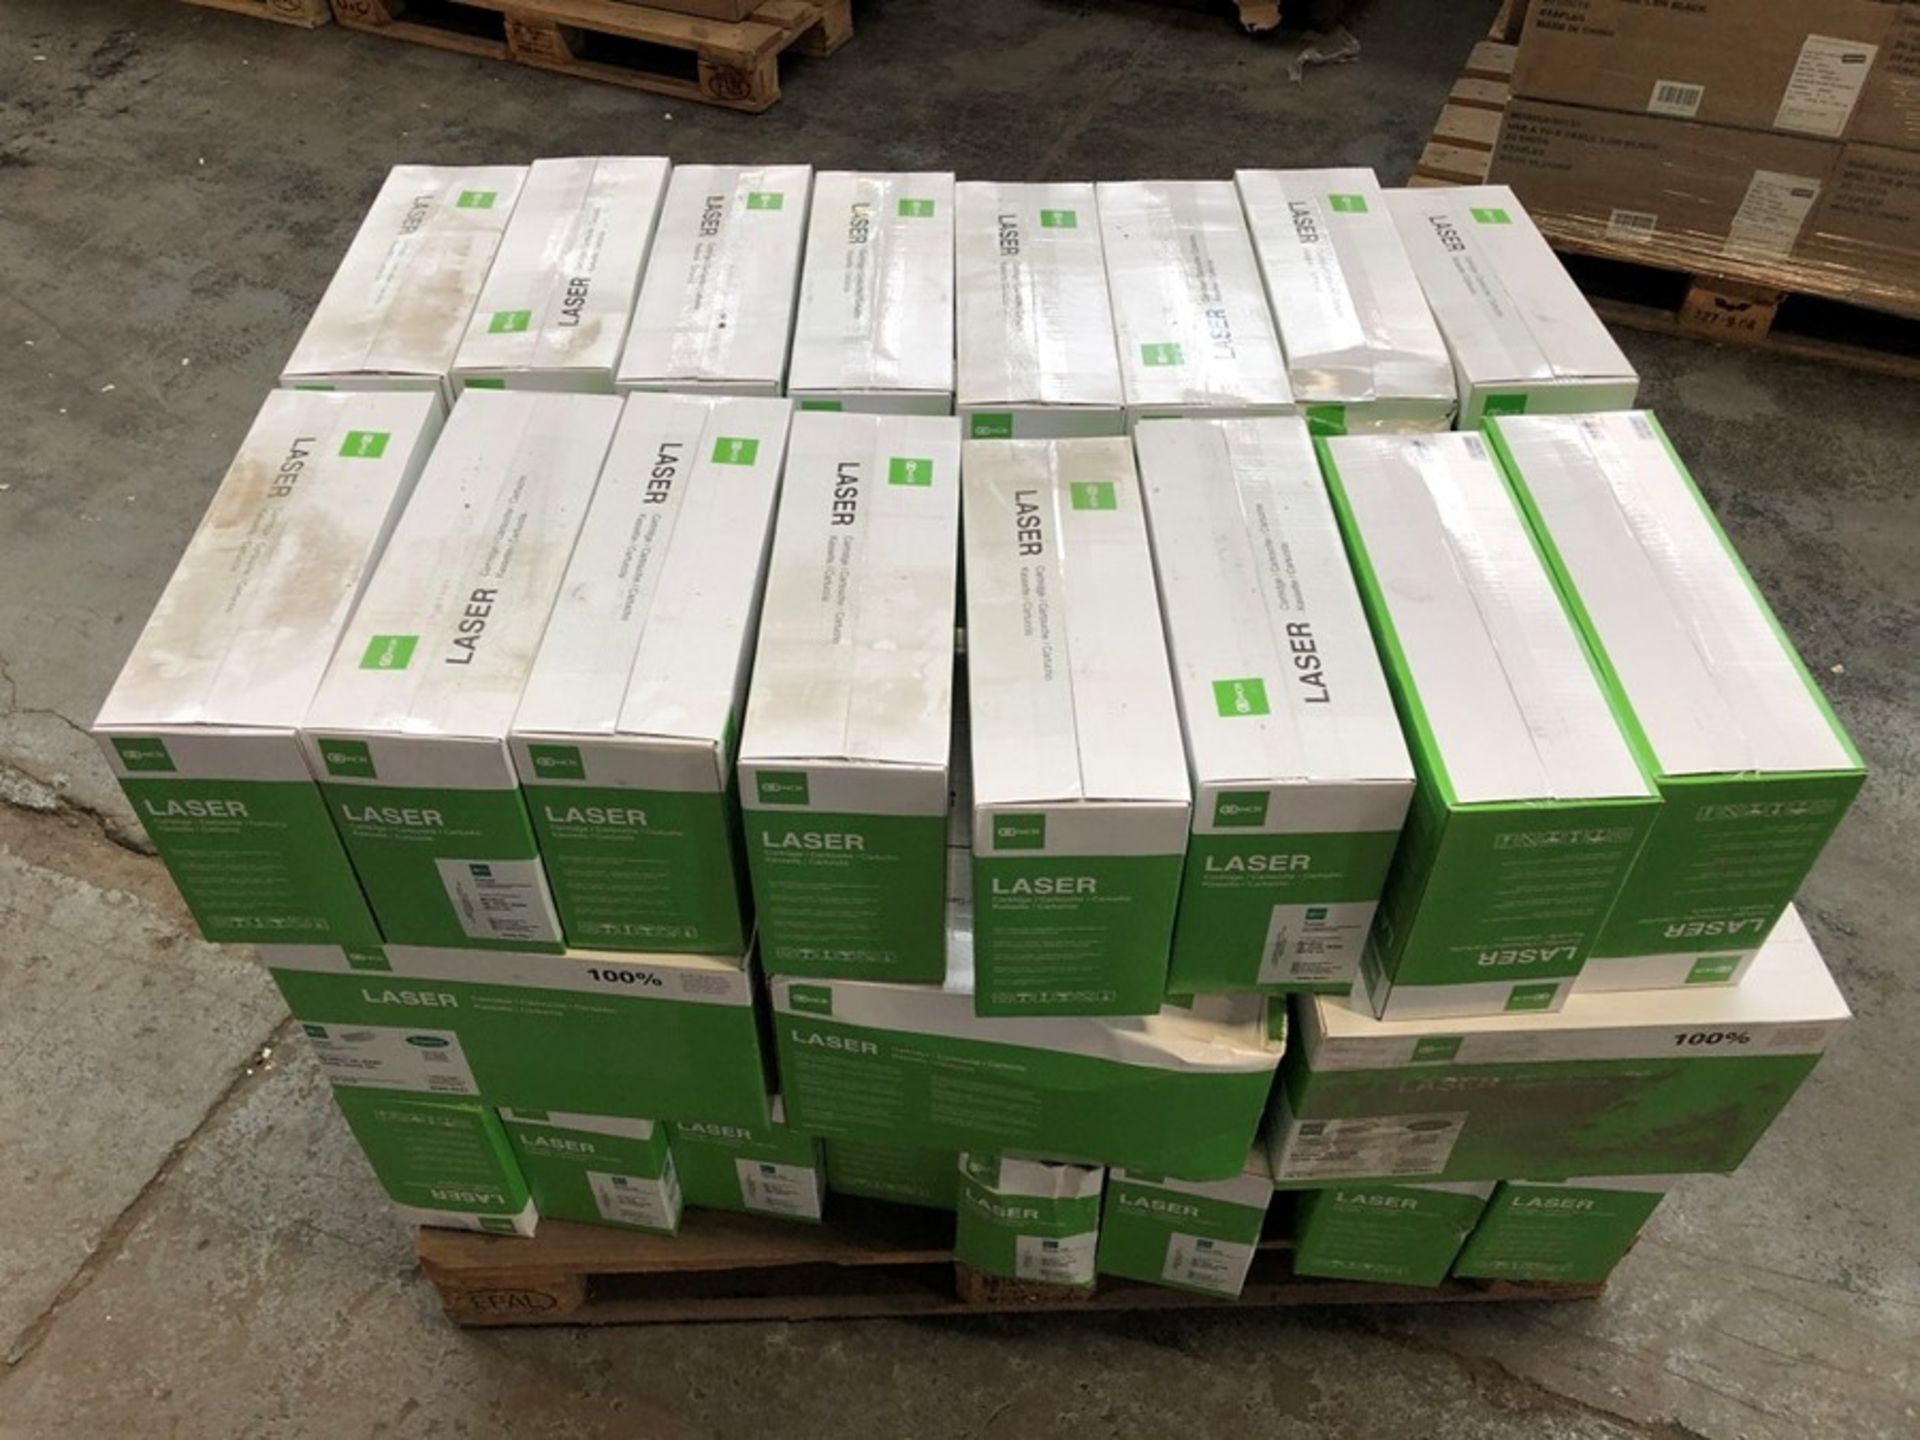 1 LOT TO CONTAIN APPROX 40 LASER PRINTER TONER CARTRIDGES, BROTHER HL-5240 / (P/N - 267) / RRP £1,